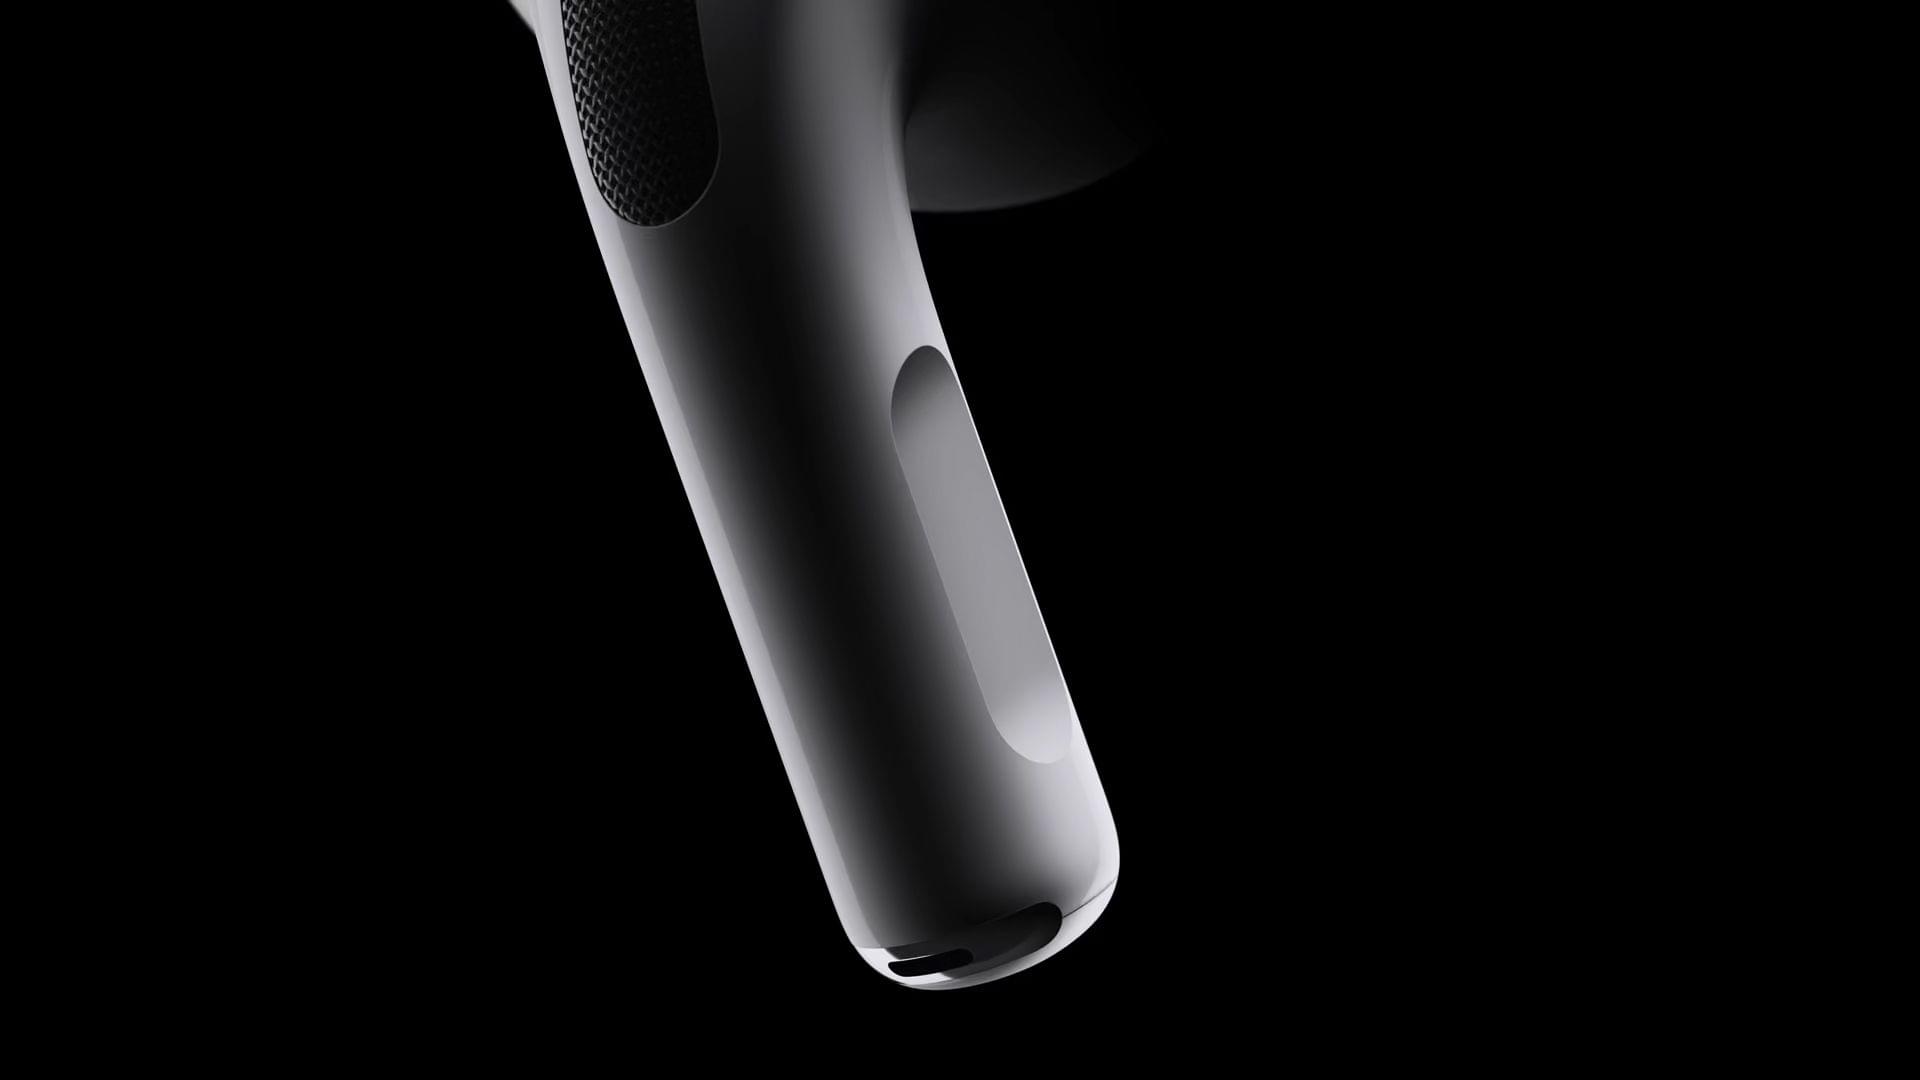 The new AirPods Pro feature touch sensitive stems for adjusting volume. Source: Apple.